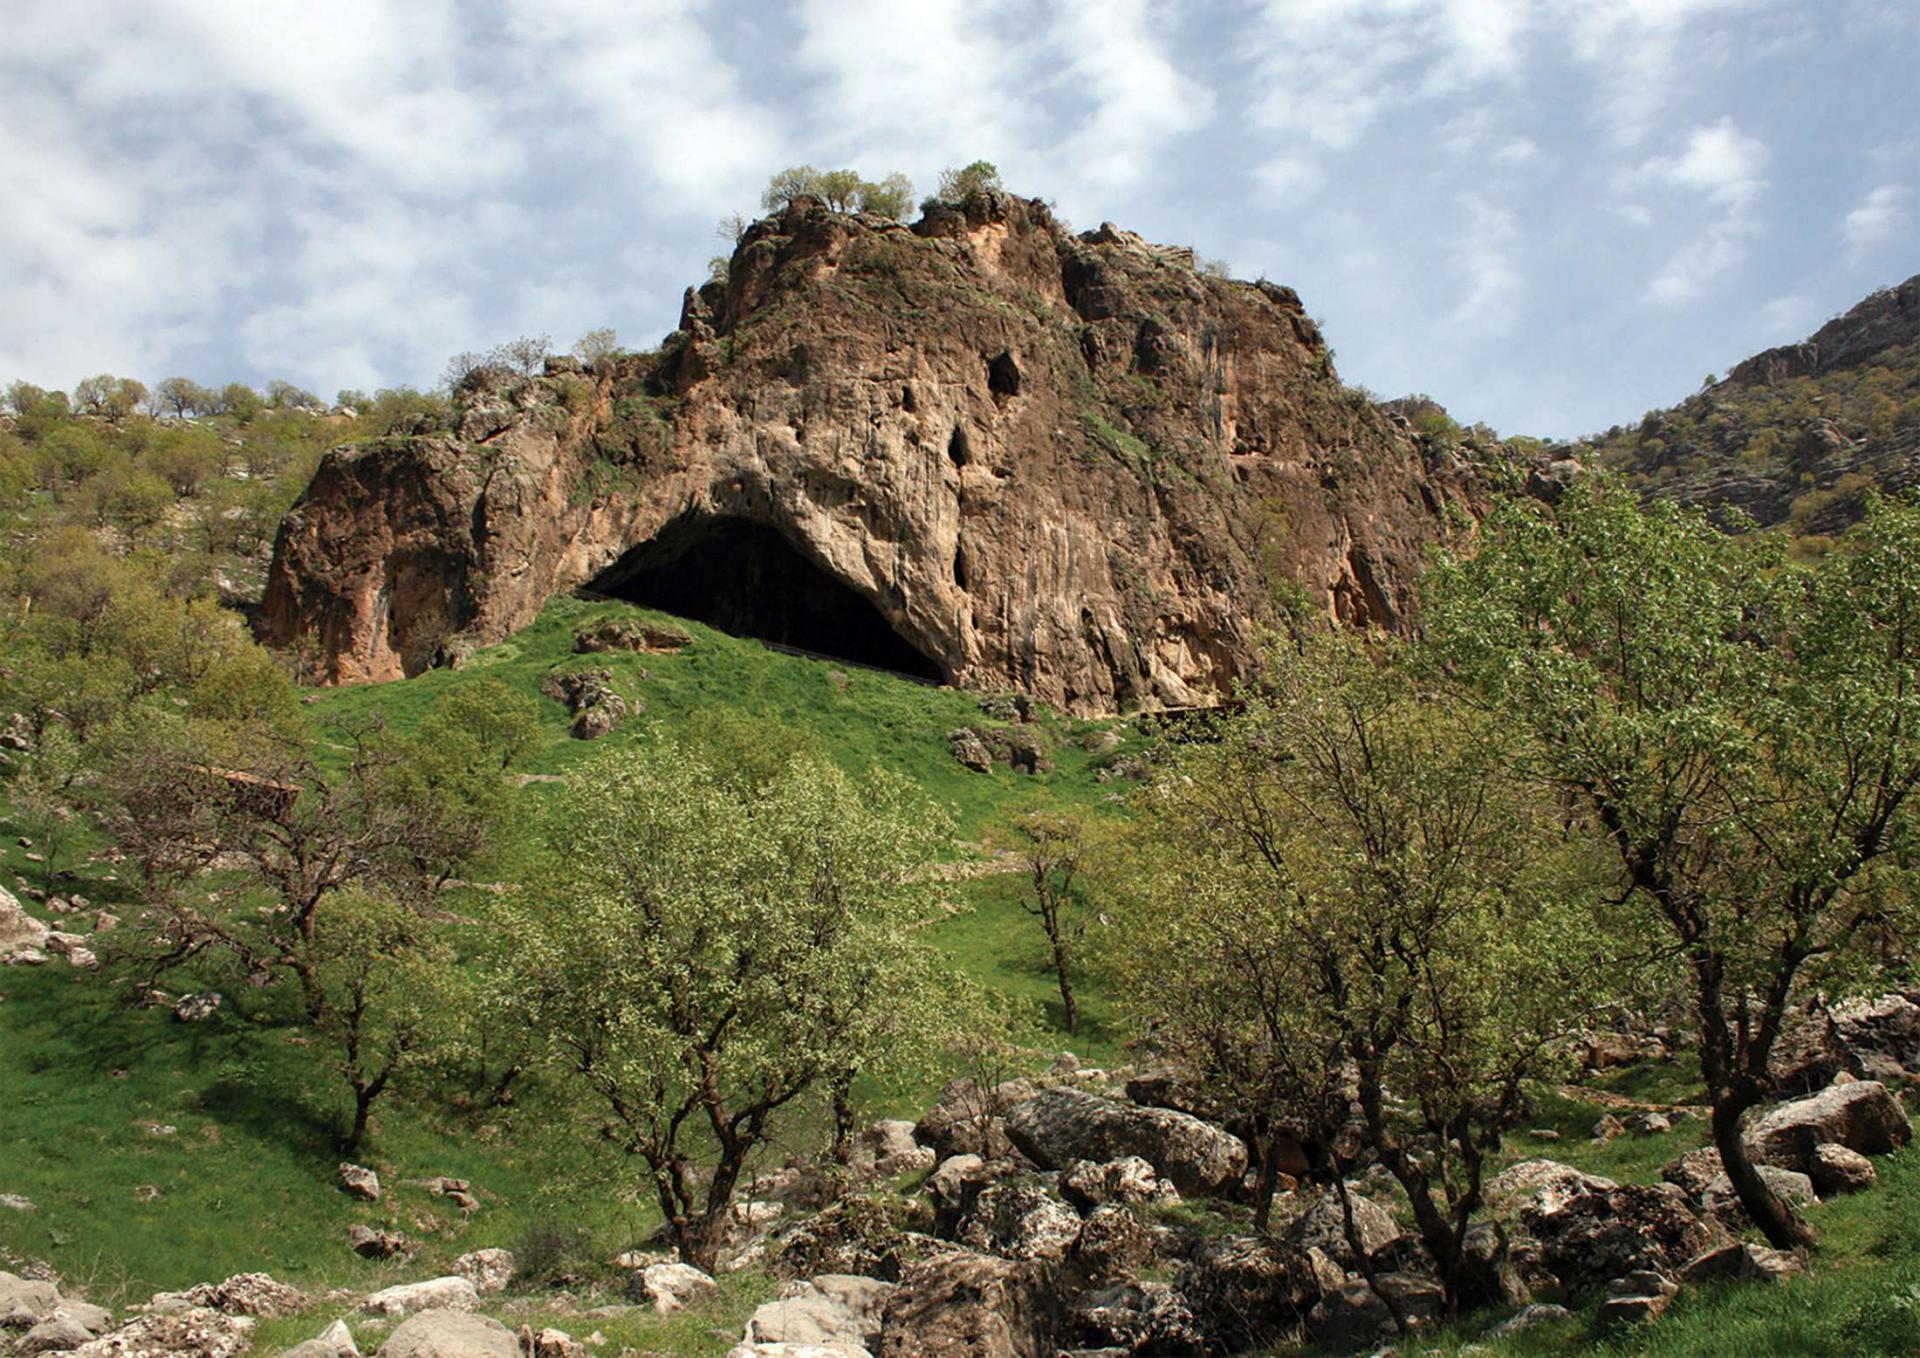 The cave was a pivotal site for mid-20th century archaeology